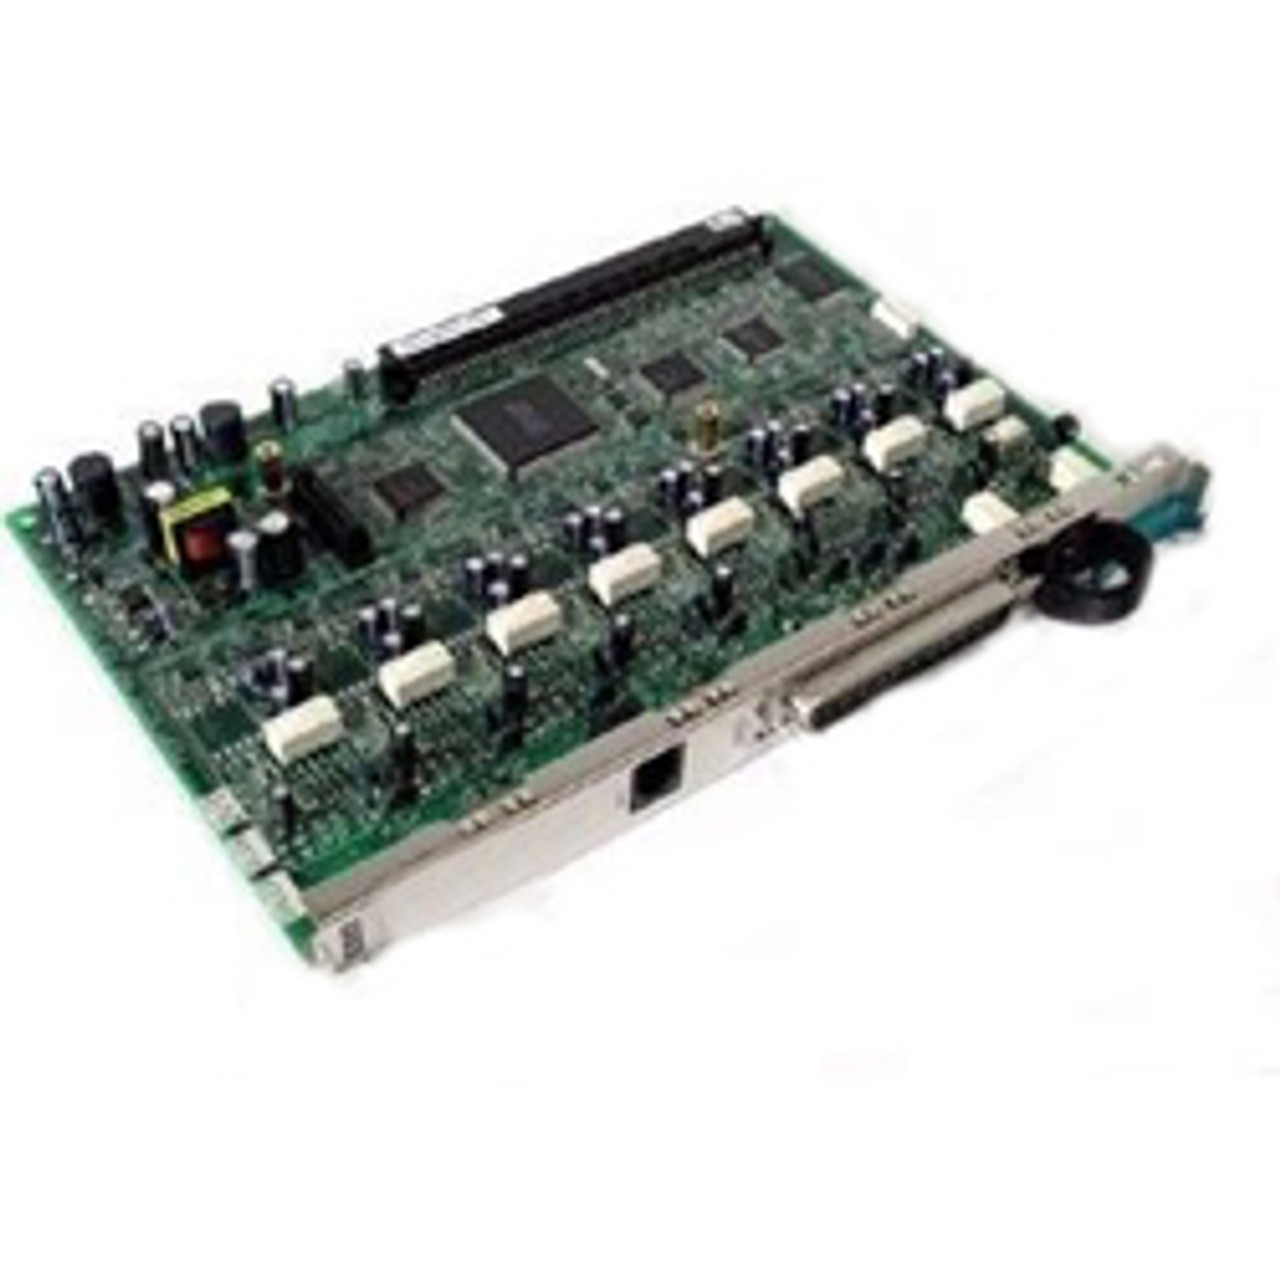 Panasonic KX-TDA0470 IP-EXT16 16 Channel VoIP Extension Card